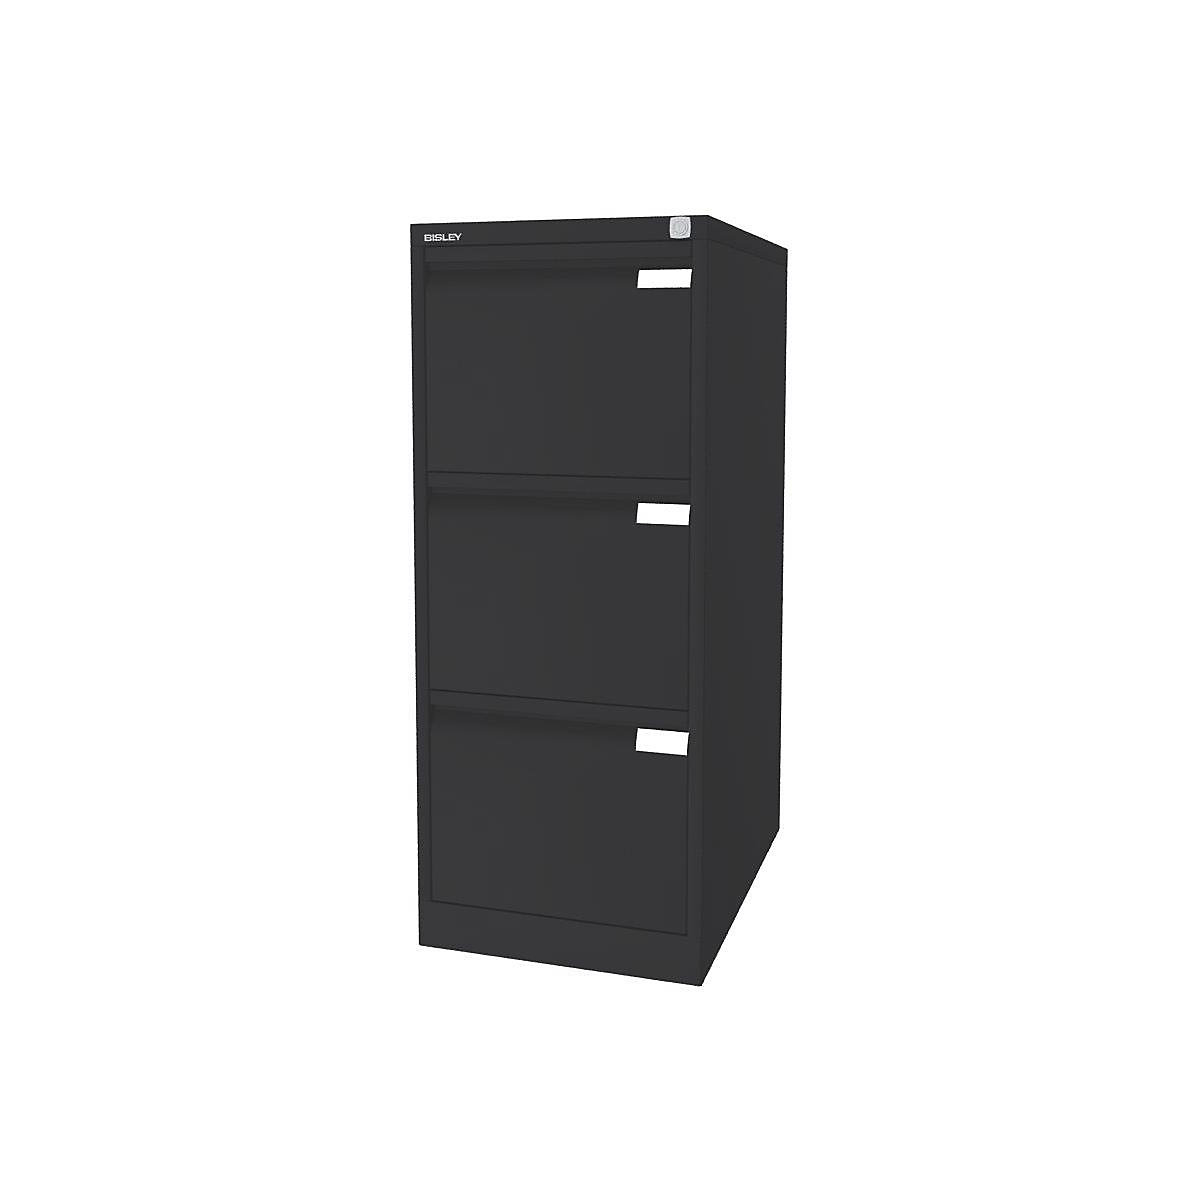 Suspension file cabinet, 1-track – BISLEY, 3 A4 drawers, charcoal-11